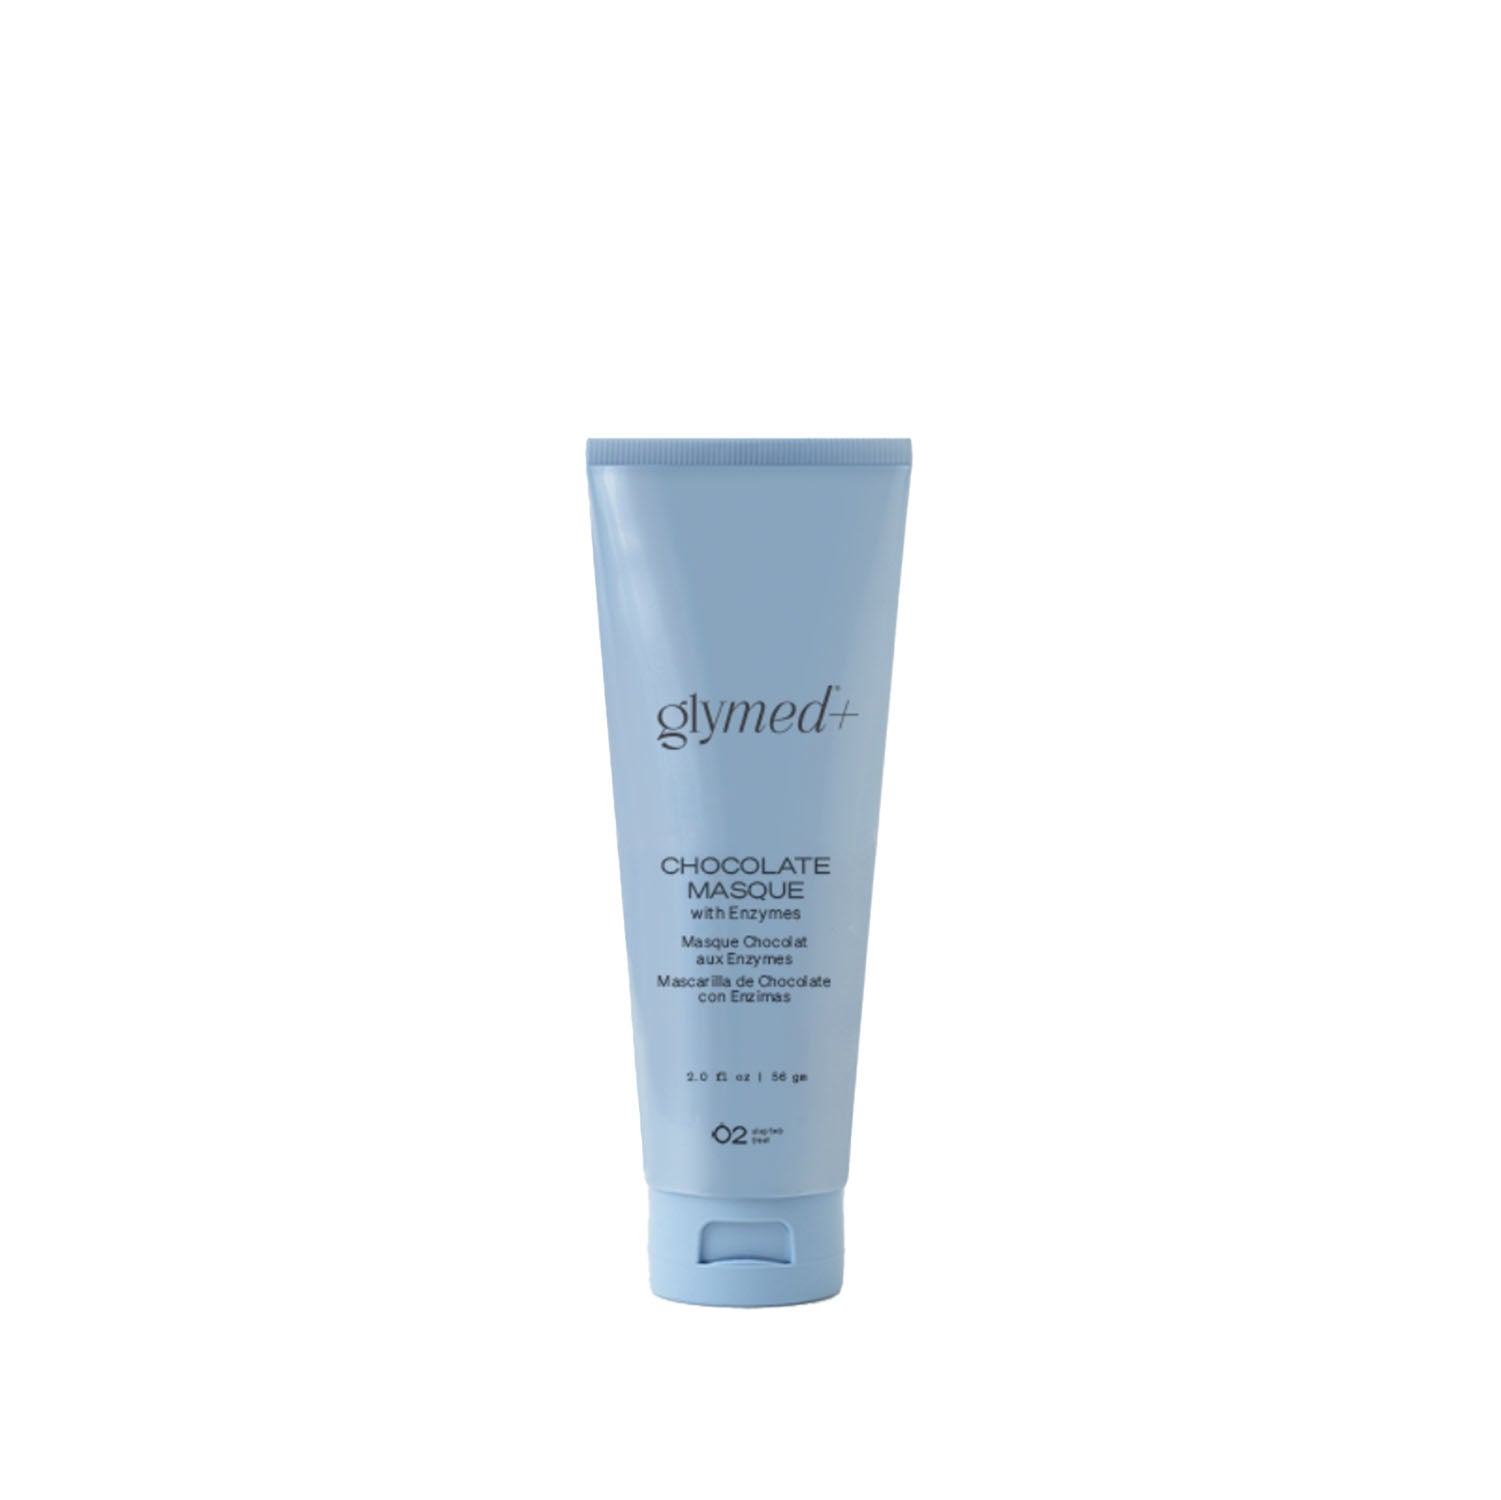 glymed+ Chocolate Masque with Enzymes